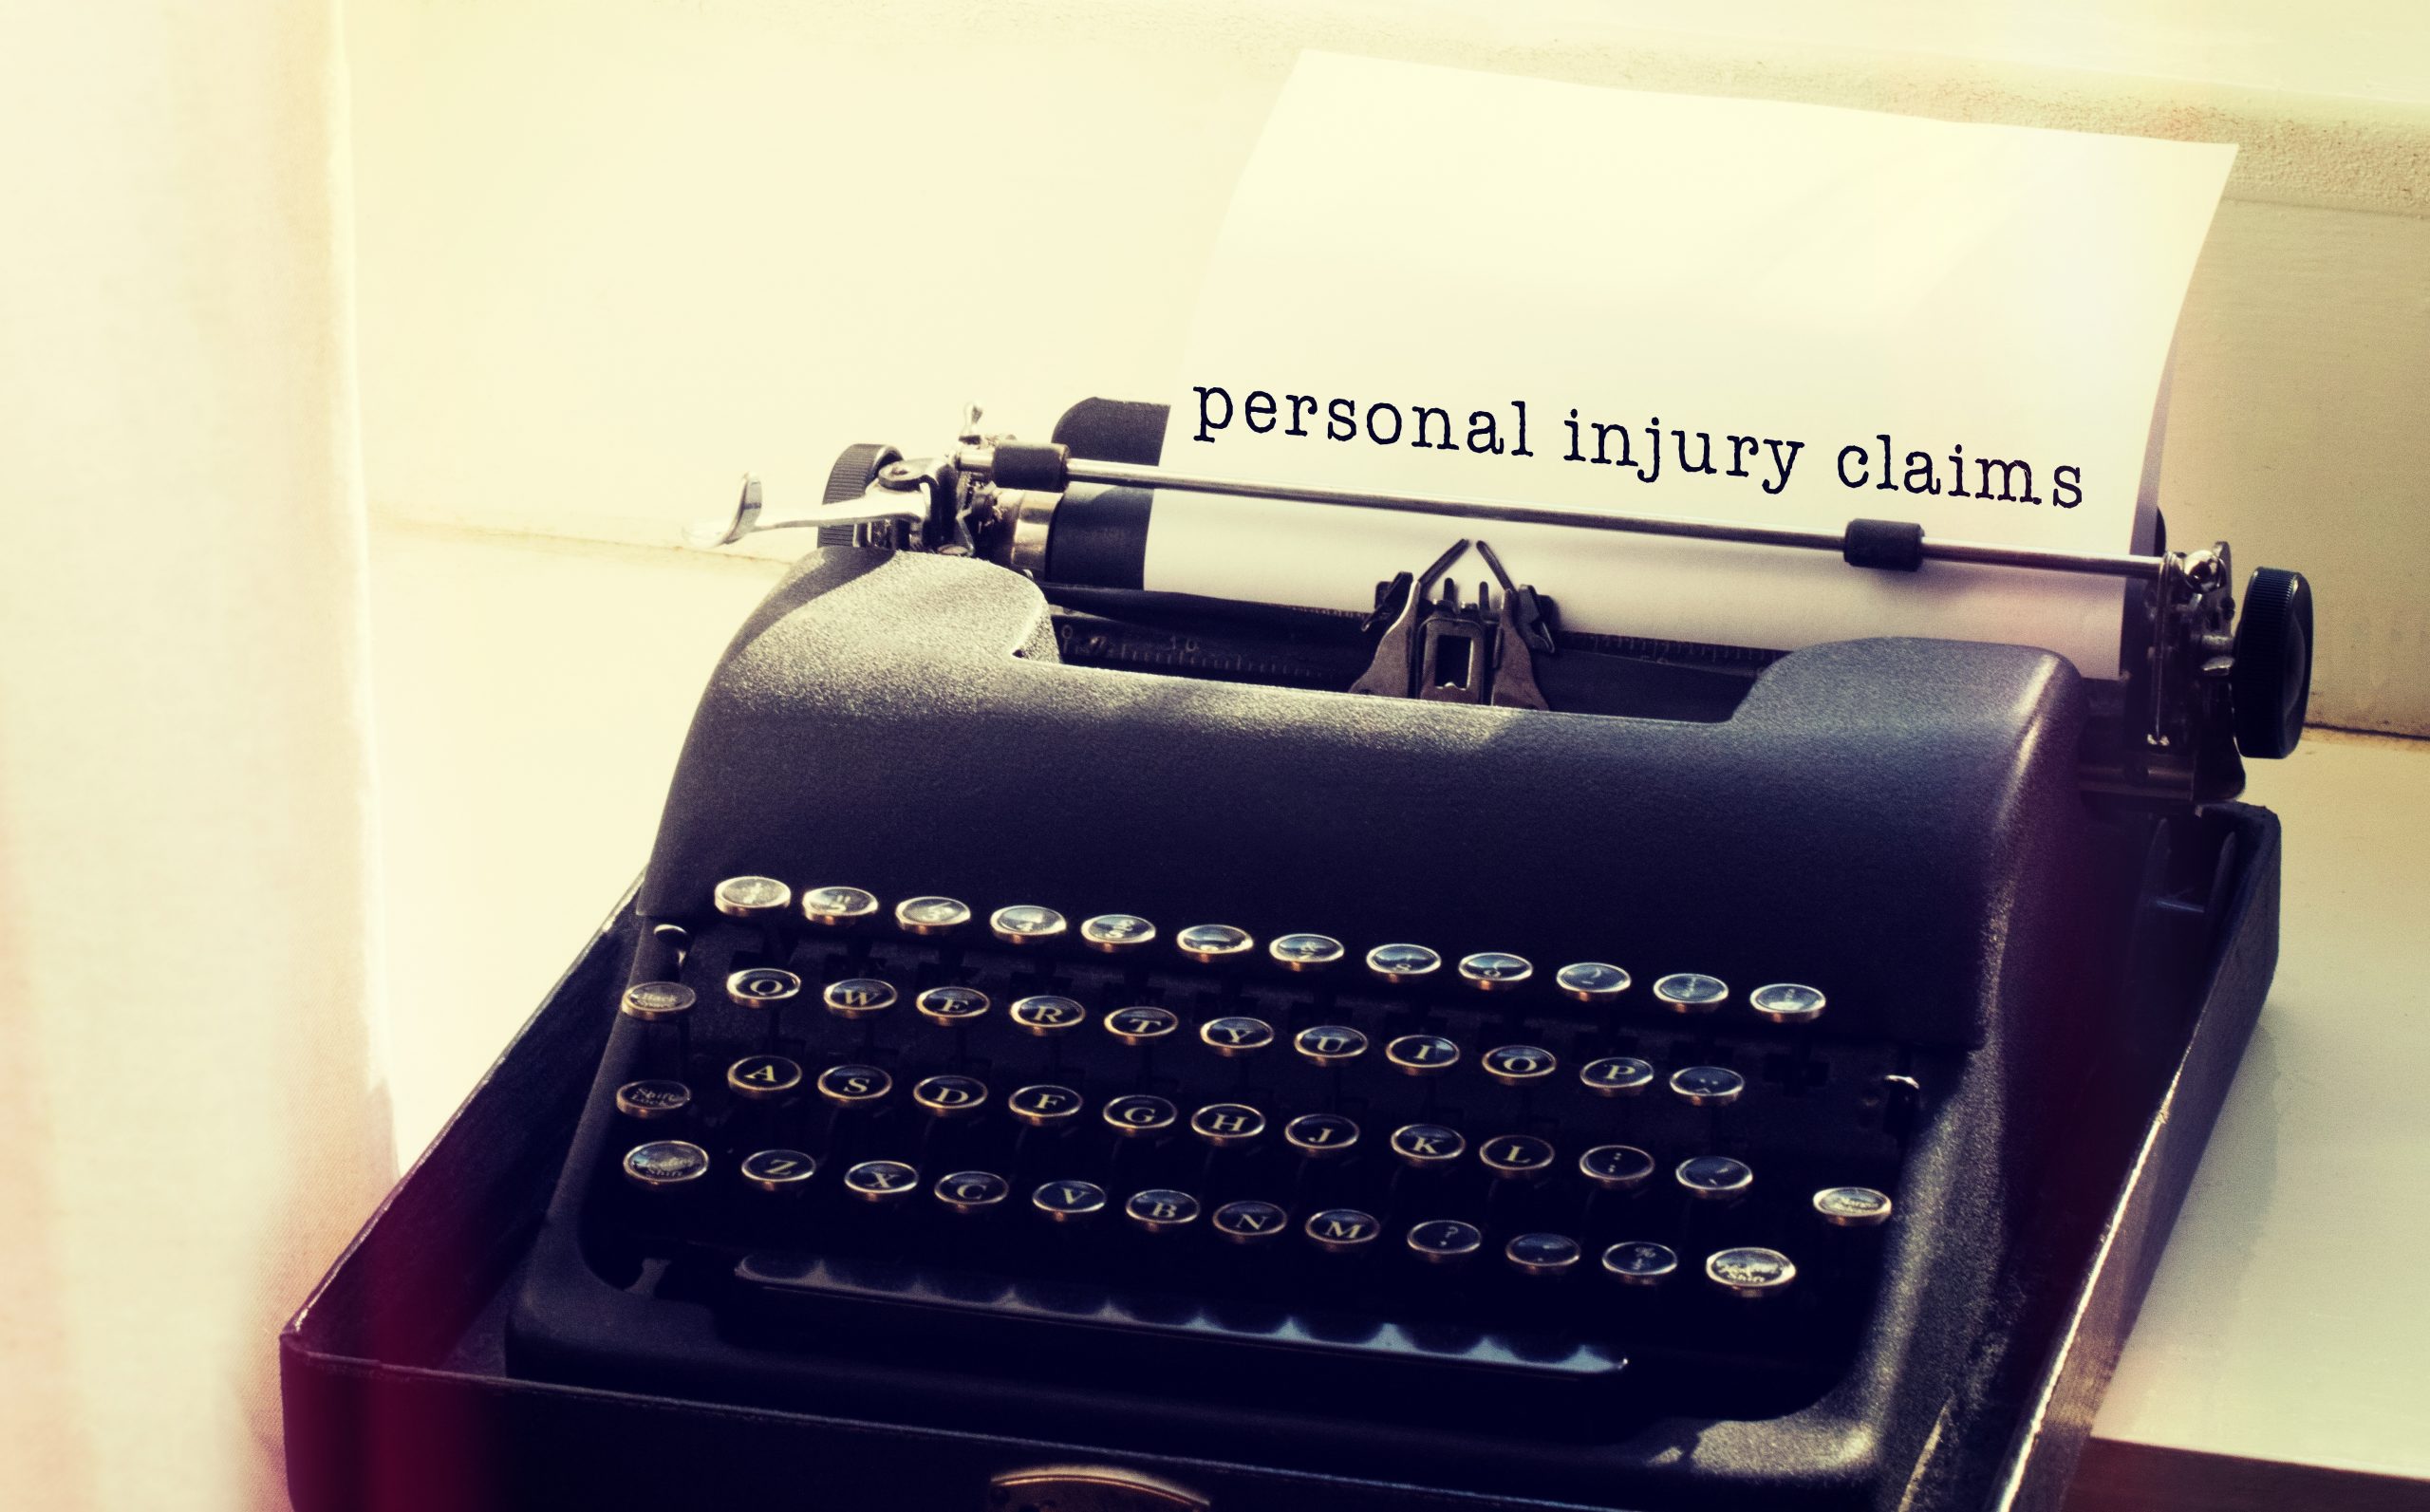 personal injury claims typed on old time typewriter